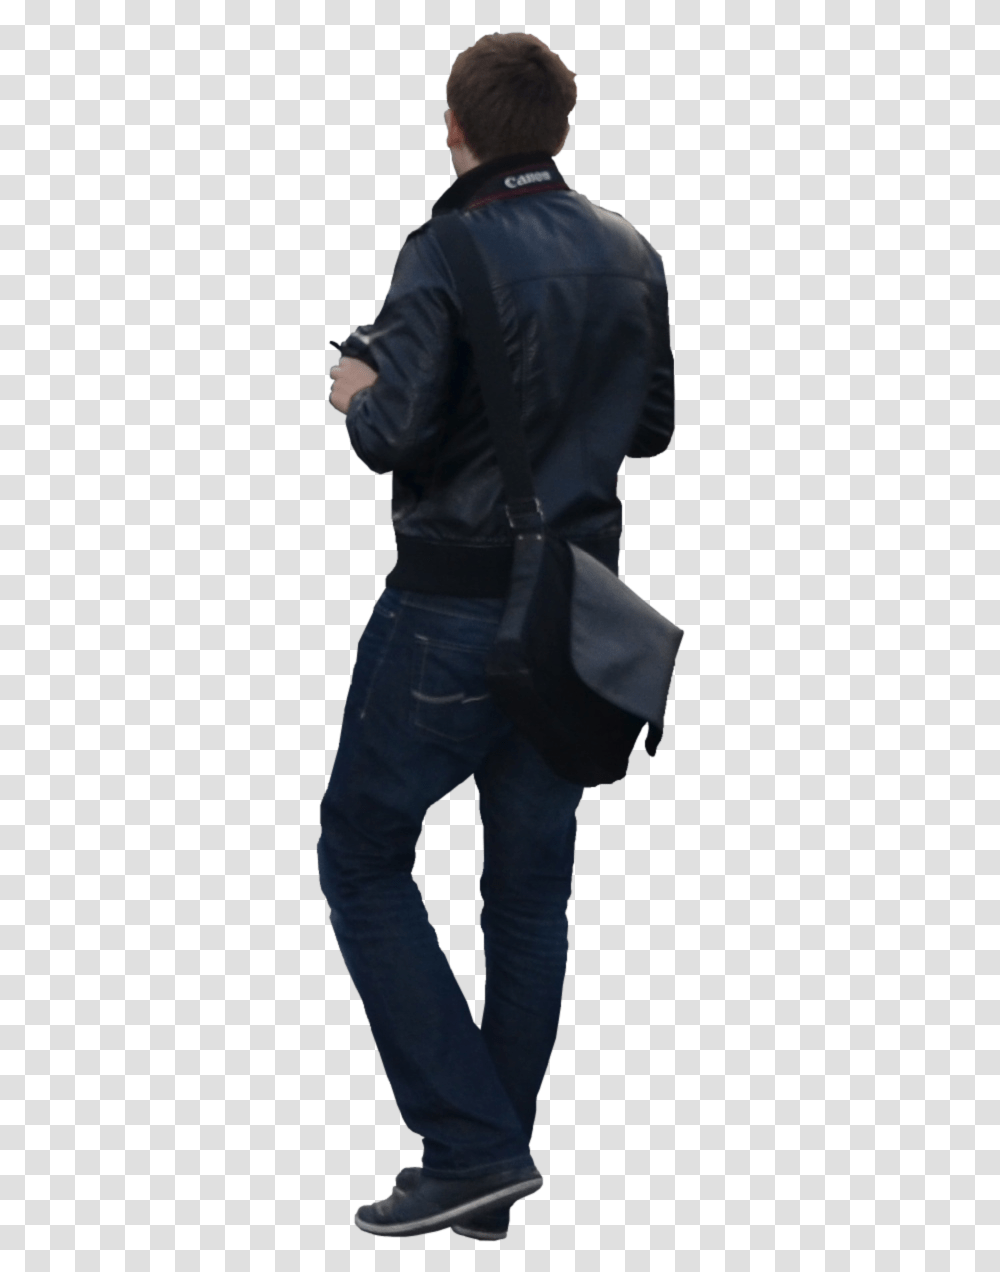 Download Free High Quality People Images Camera Man Back, Person, Pants, Jacket Transparent Png